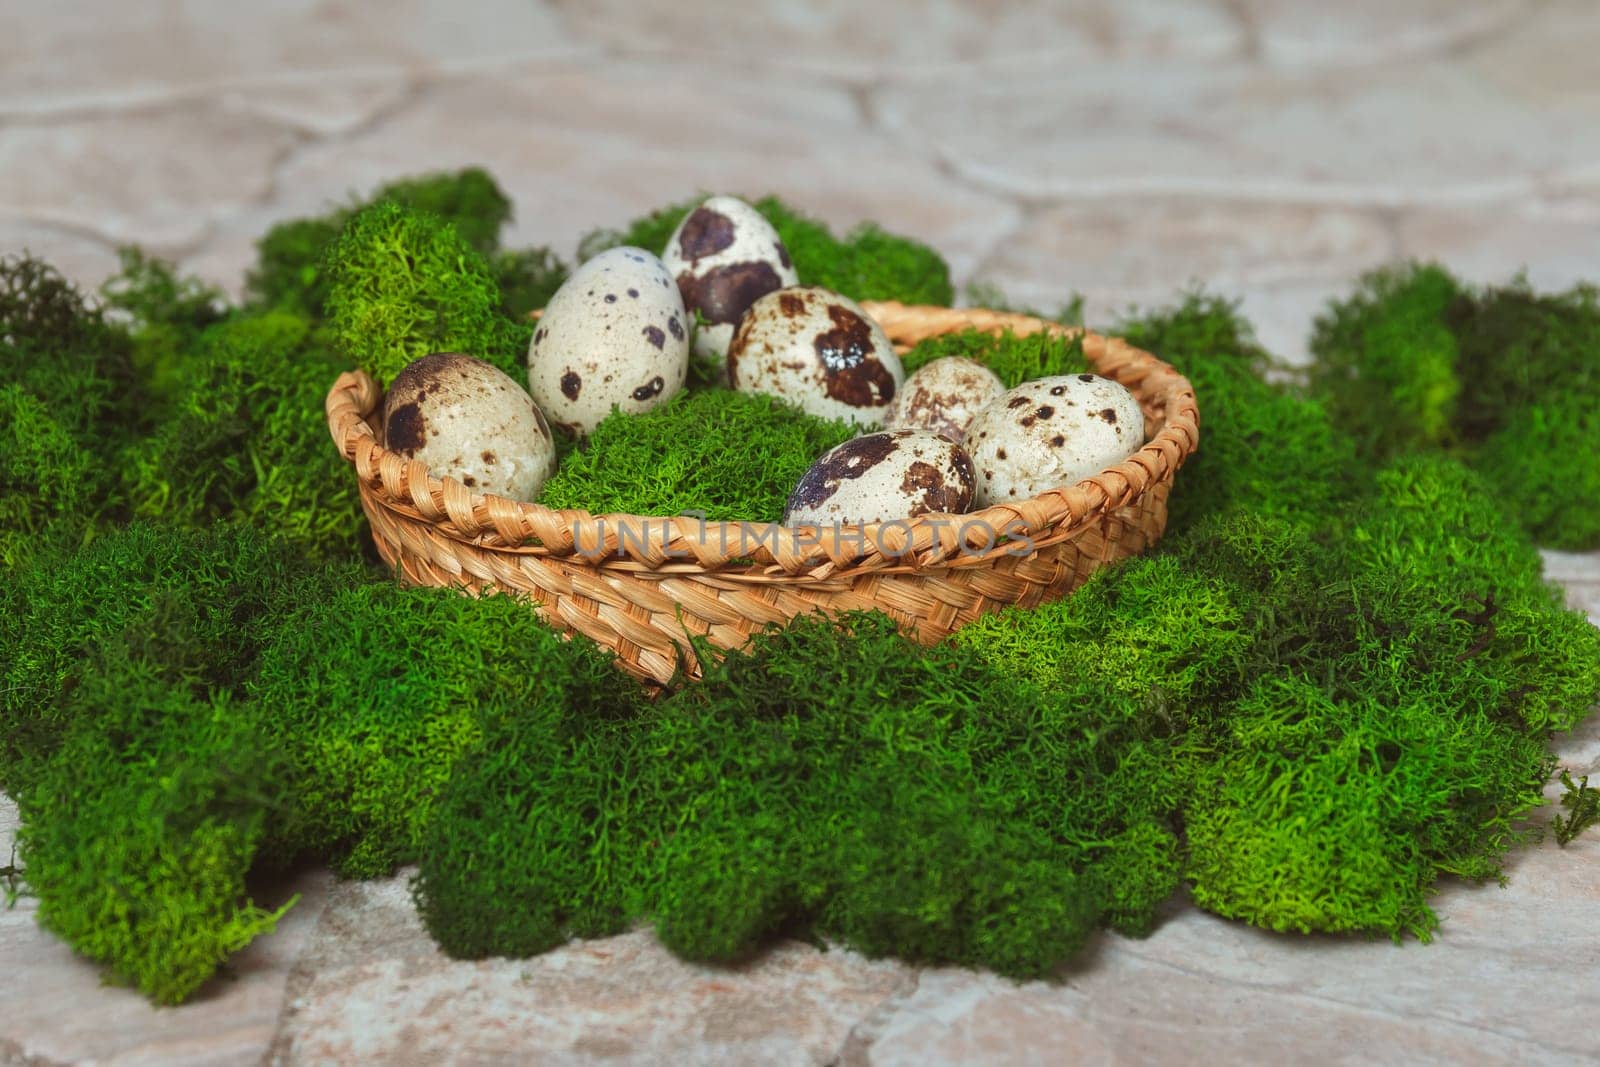 Quail eggs lie among green moss in a wicker basket on a stone background